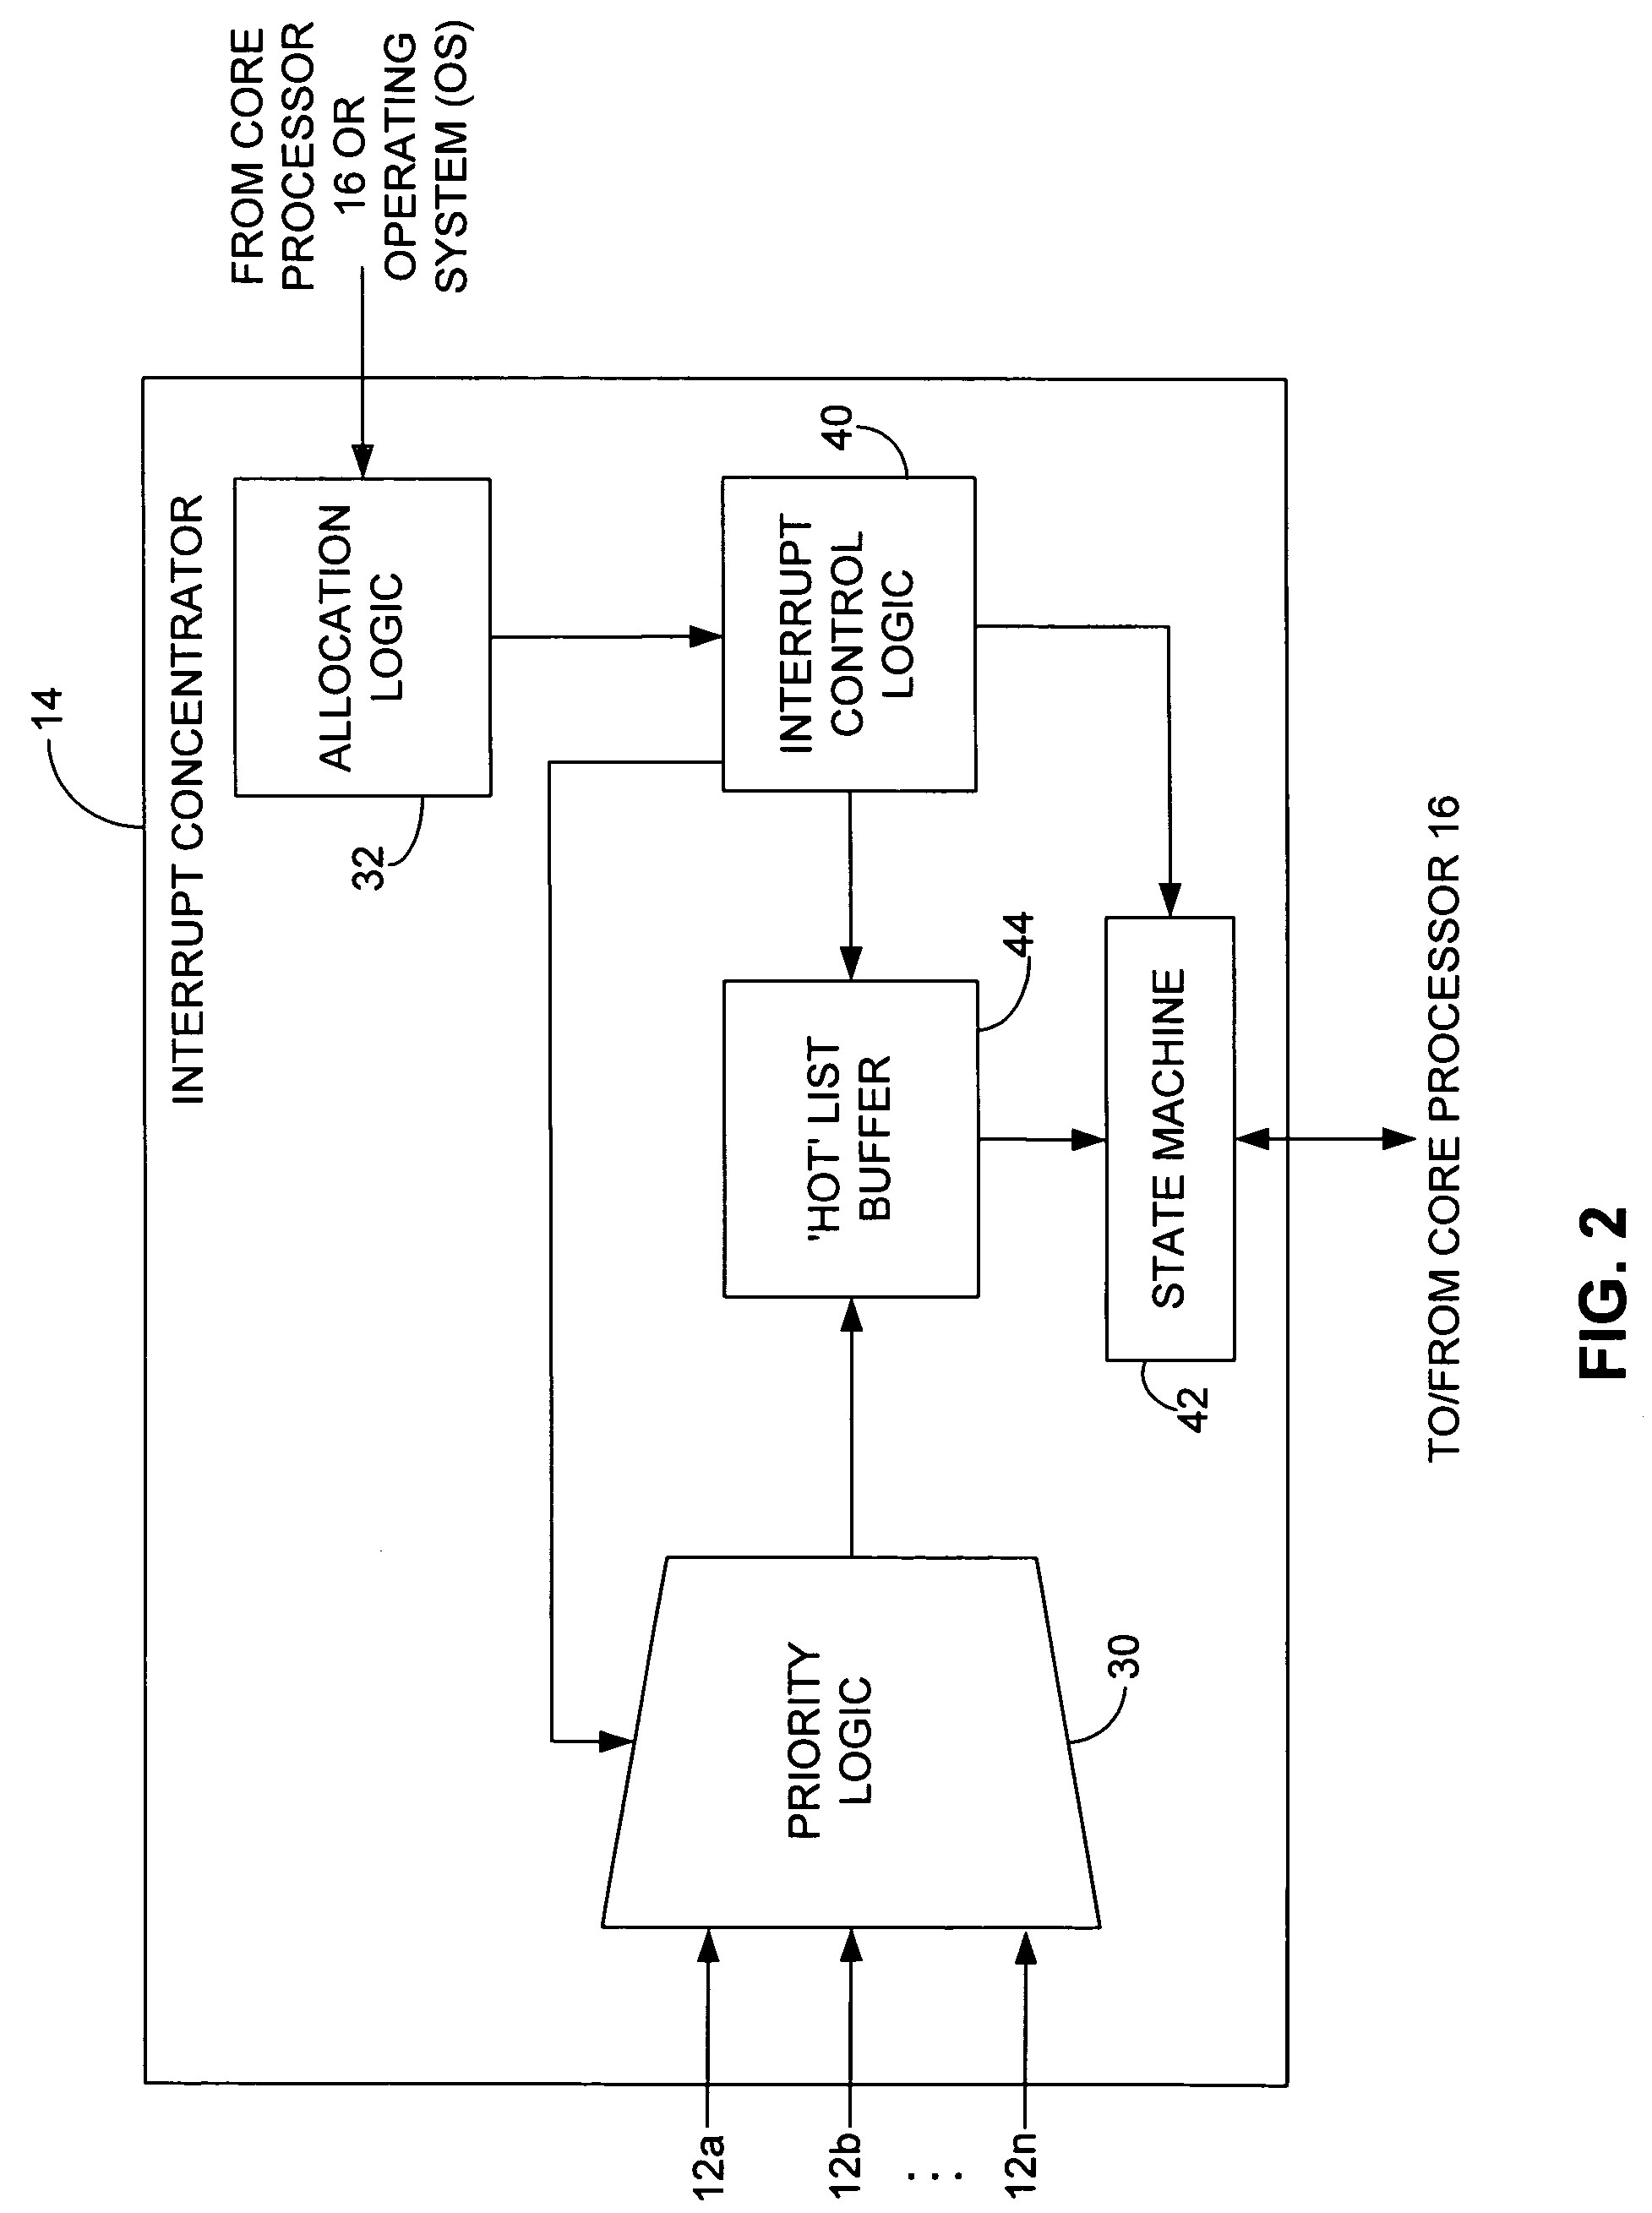 Allocation of processor bandwidth between main program and interrupt service instruction based on interrupt priority and retiring micro-ops to cache